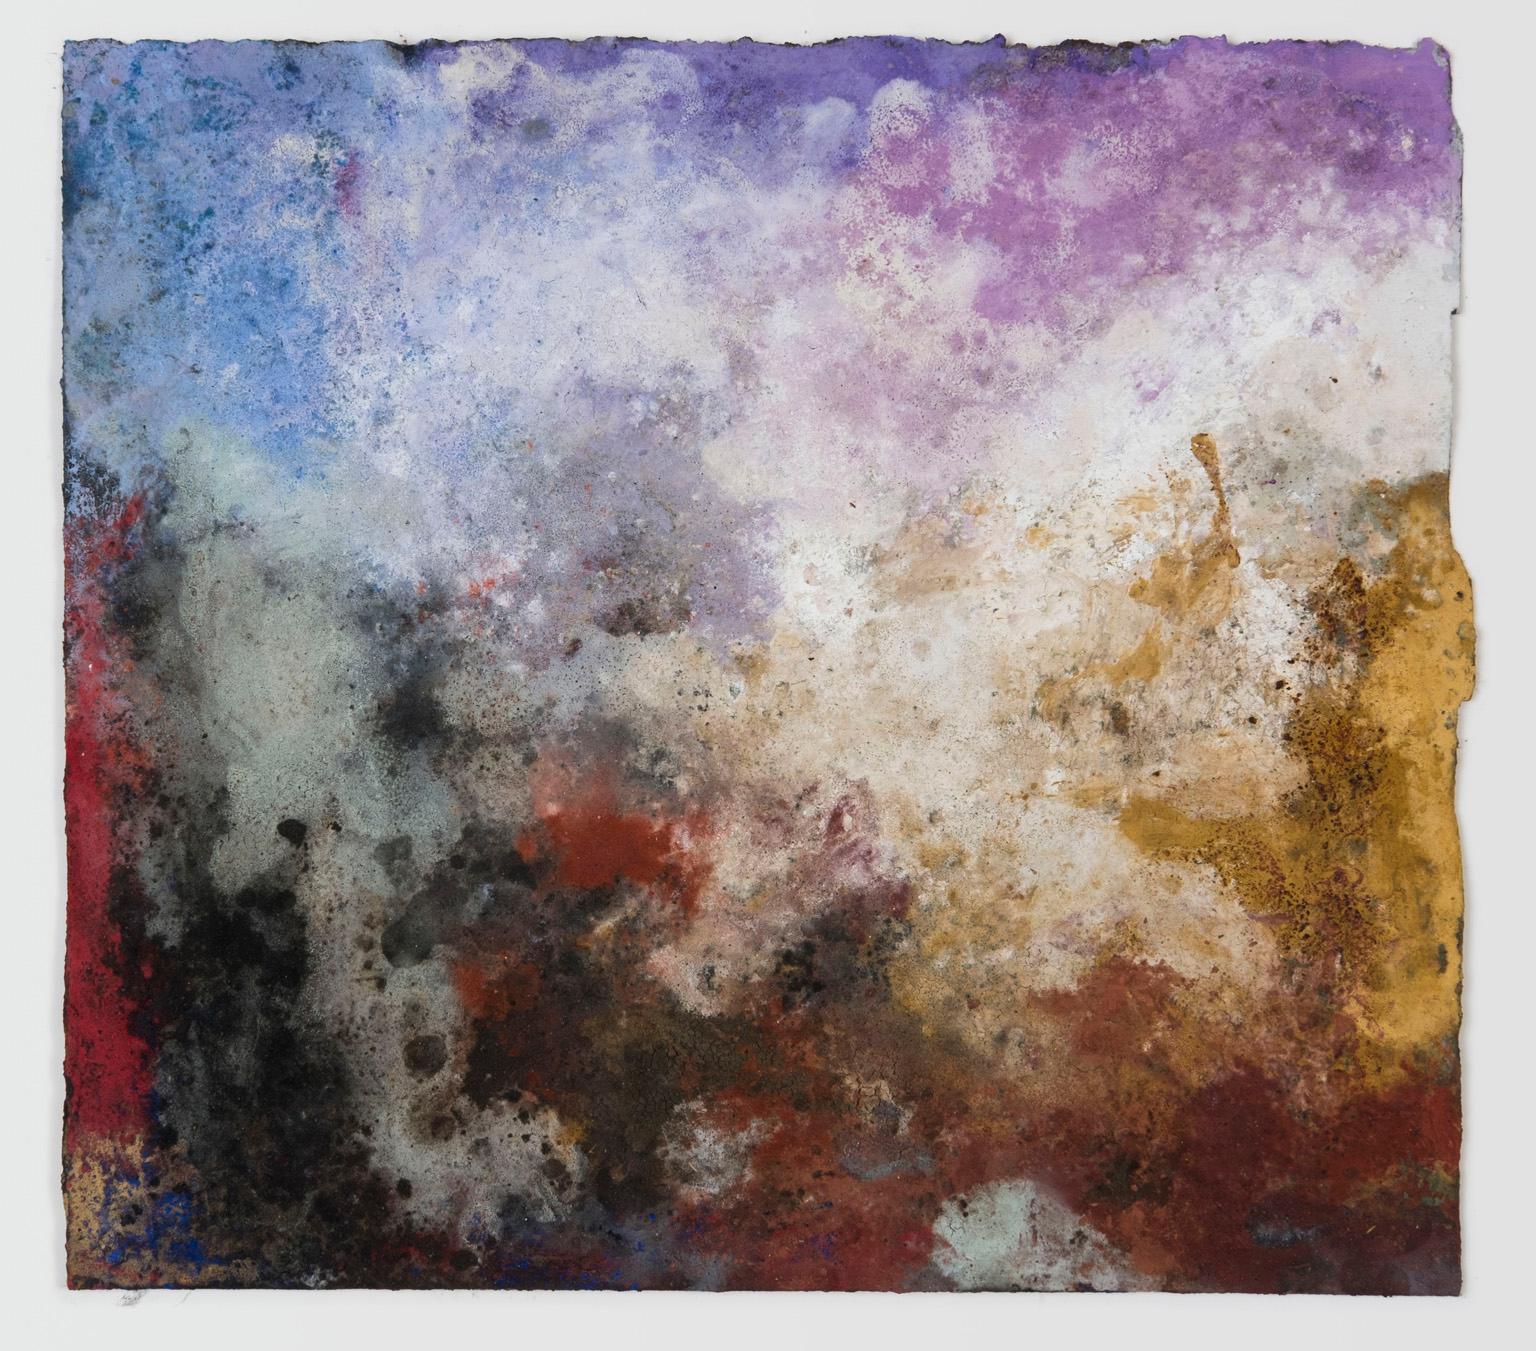 Orazio De Gennaro Abstract Painting - Terra Bruciata #13 (Scorched Earth) - Abstract Blue, Purple, and Red Painting